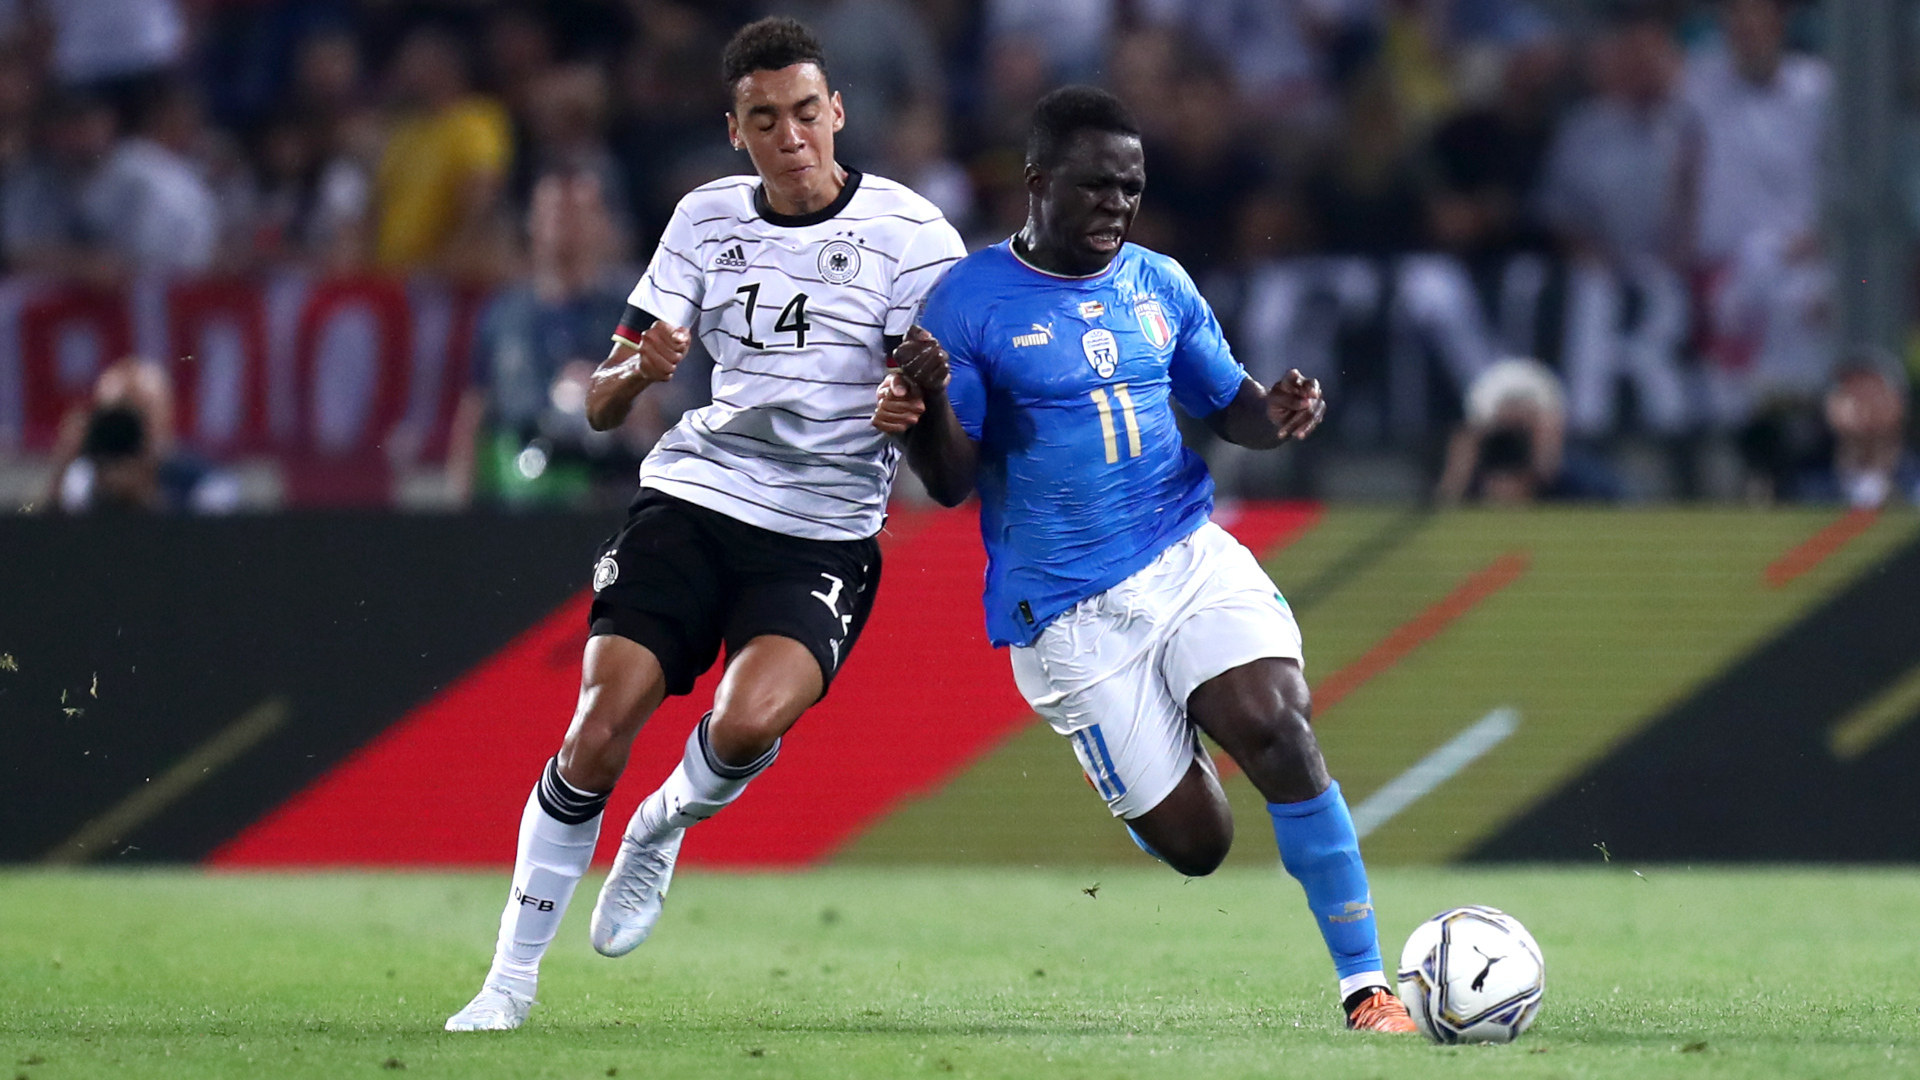 Germany vs Italy live stream how to watch Nations League online and on TV, team news TechRadar